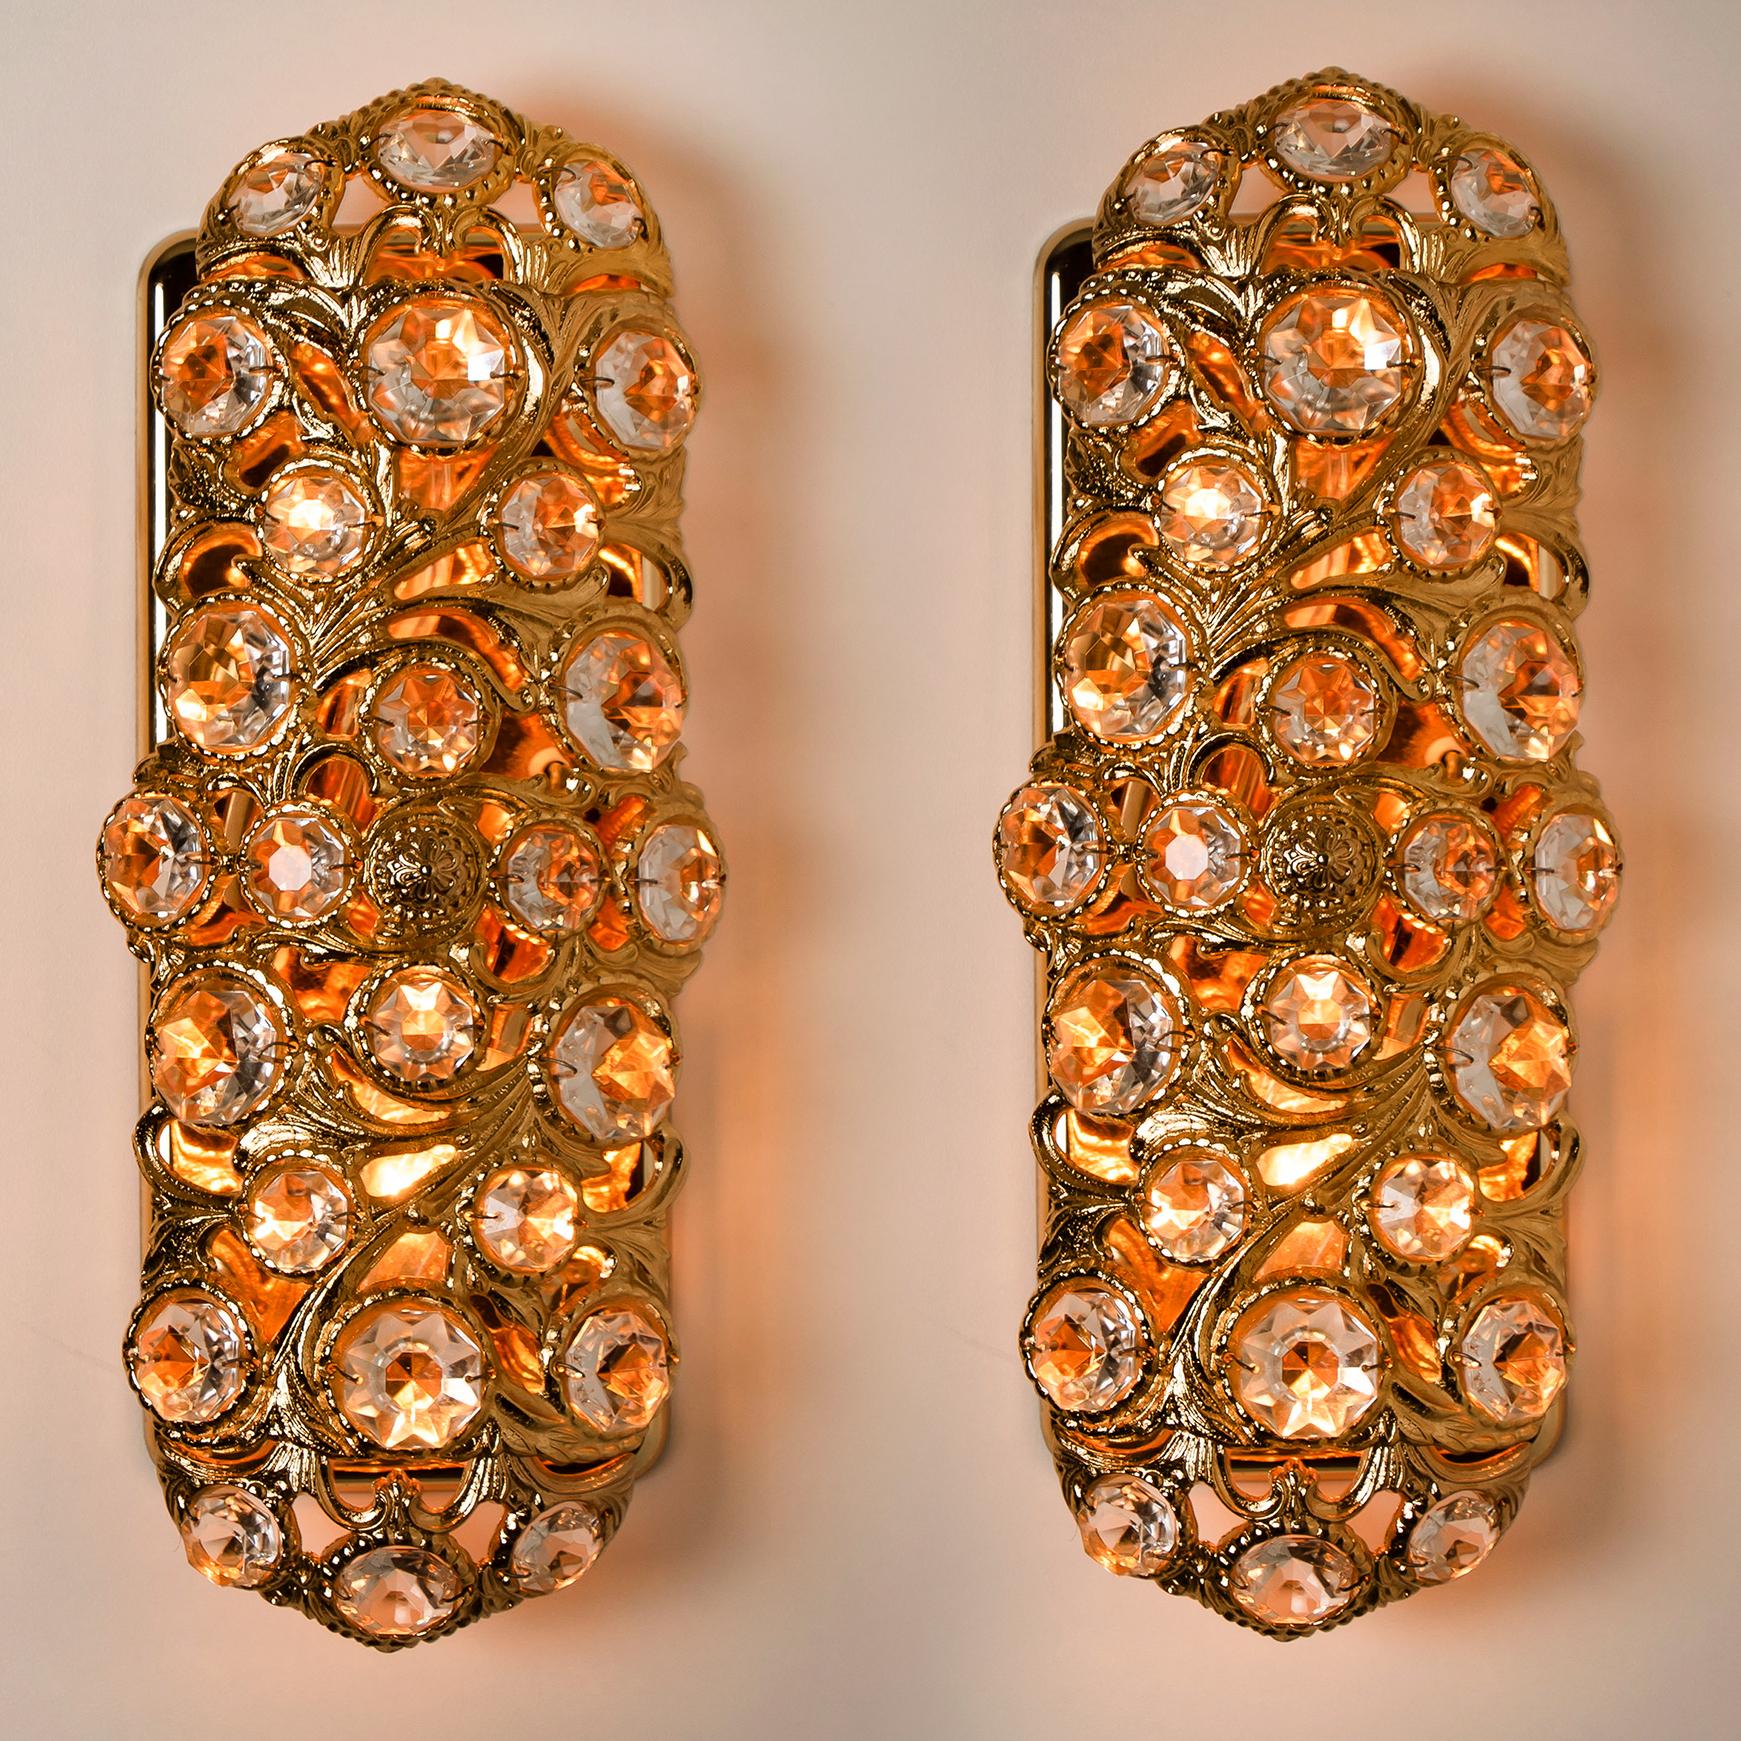 Hollywood Regency Pair of Peris Andreu Glass Prism Gold Toned Sconces, 1960